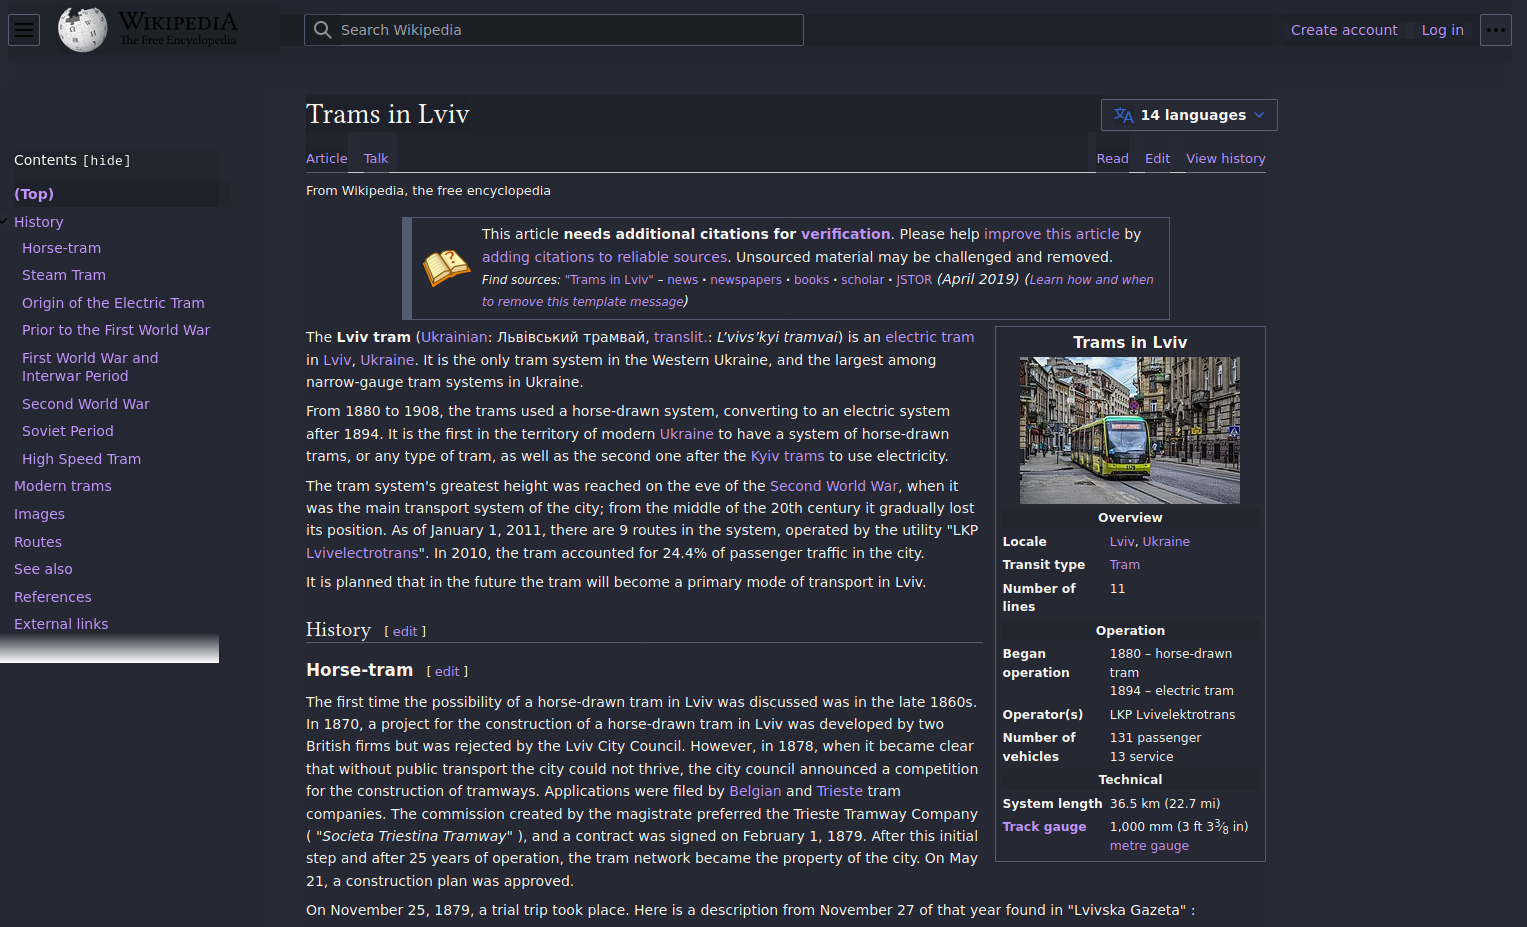 Screenshot of the 'Trams in Lyiv' Wikipedia article using the Midnight Lizard extension's custom Dracula theme to give it a little flair.